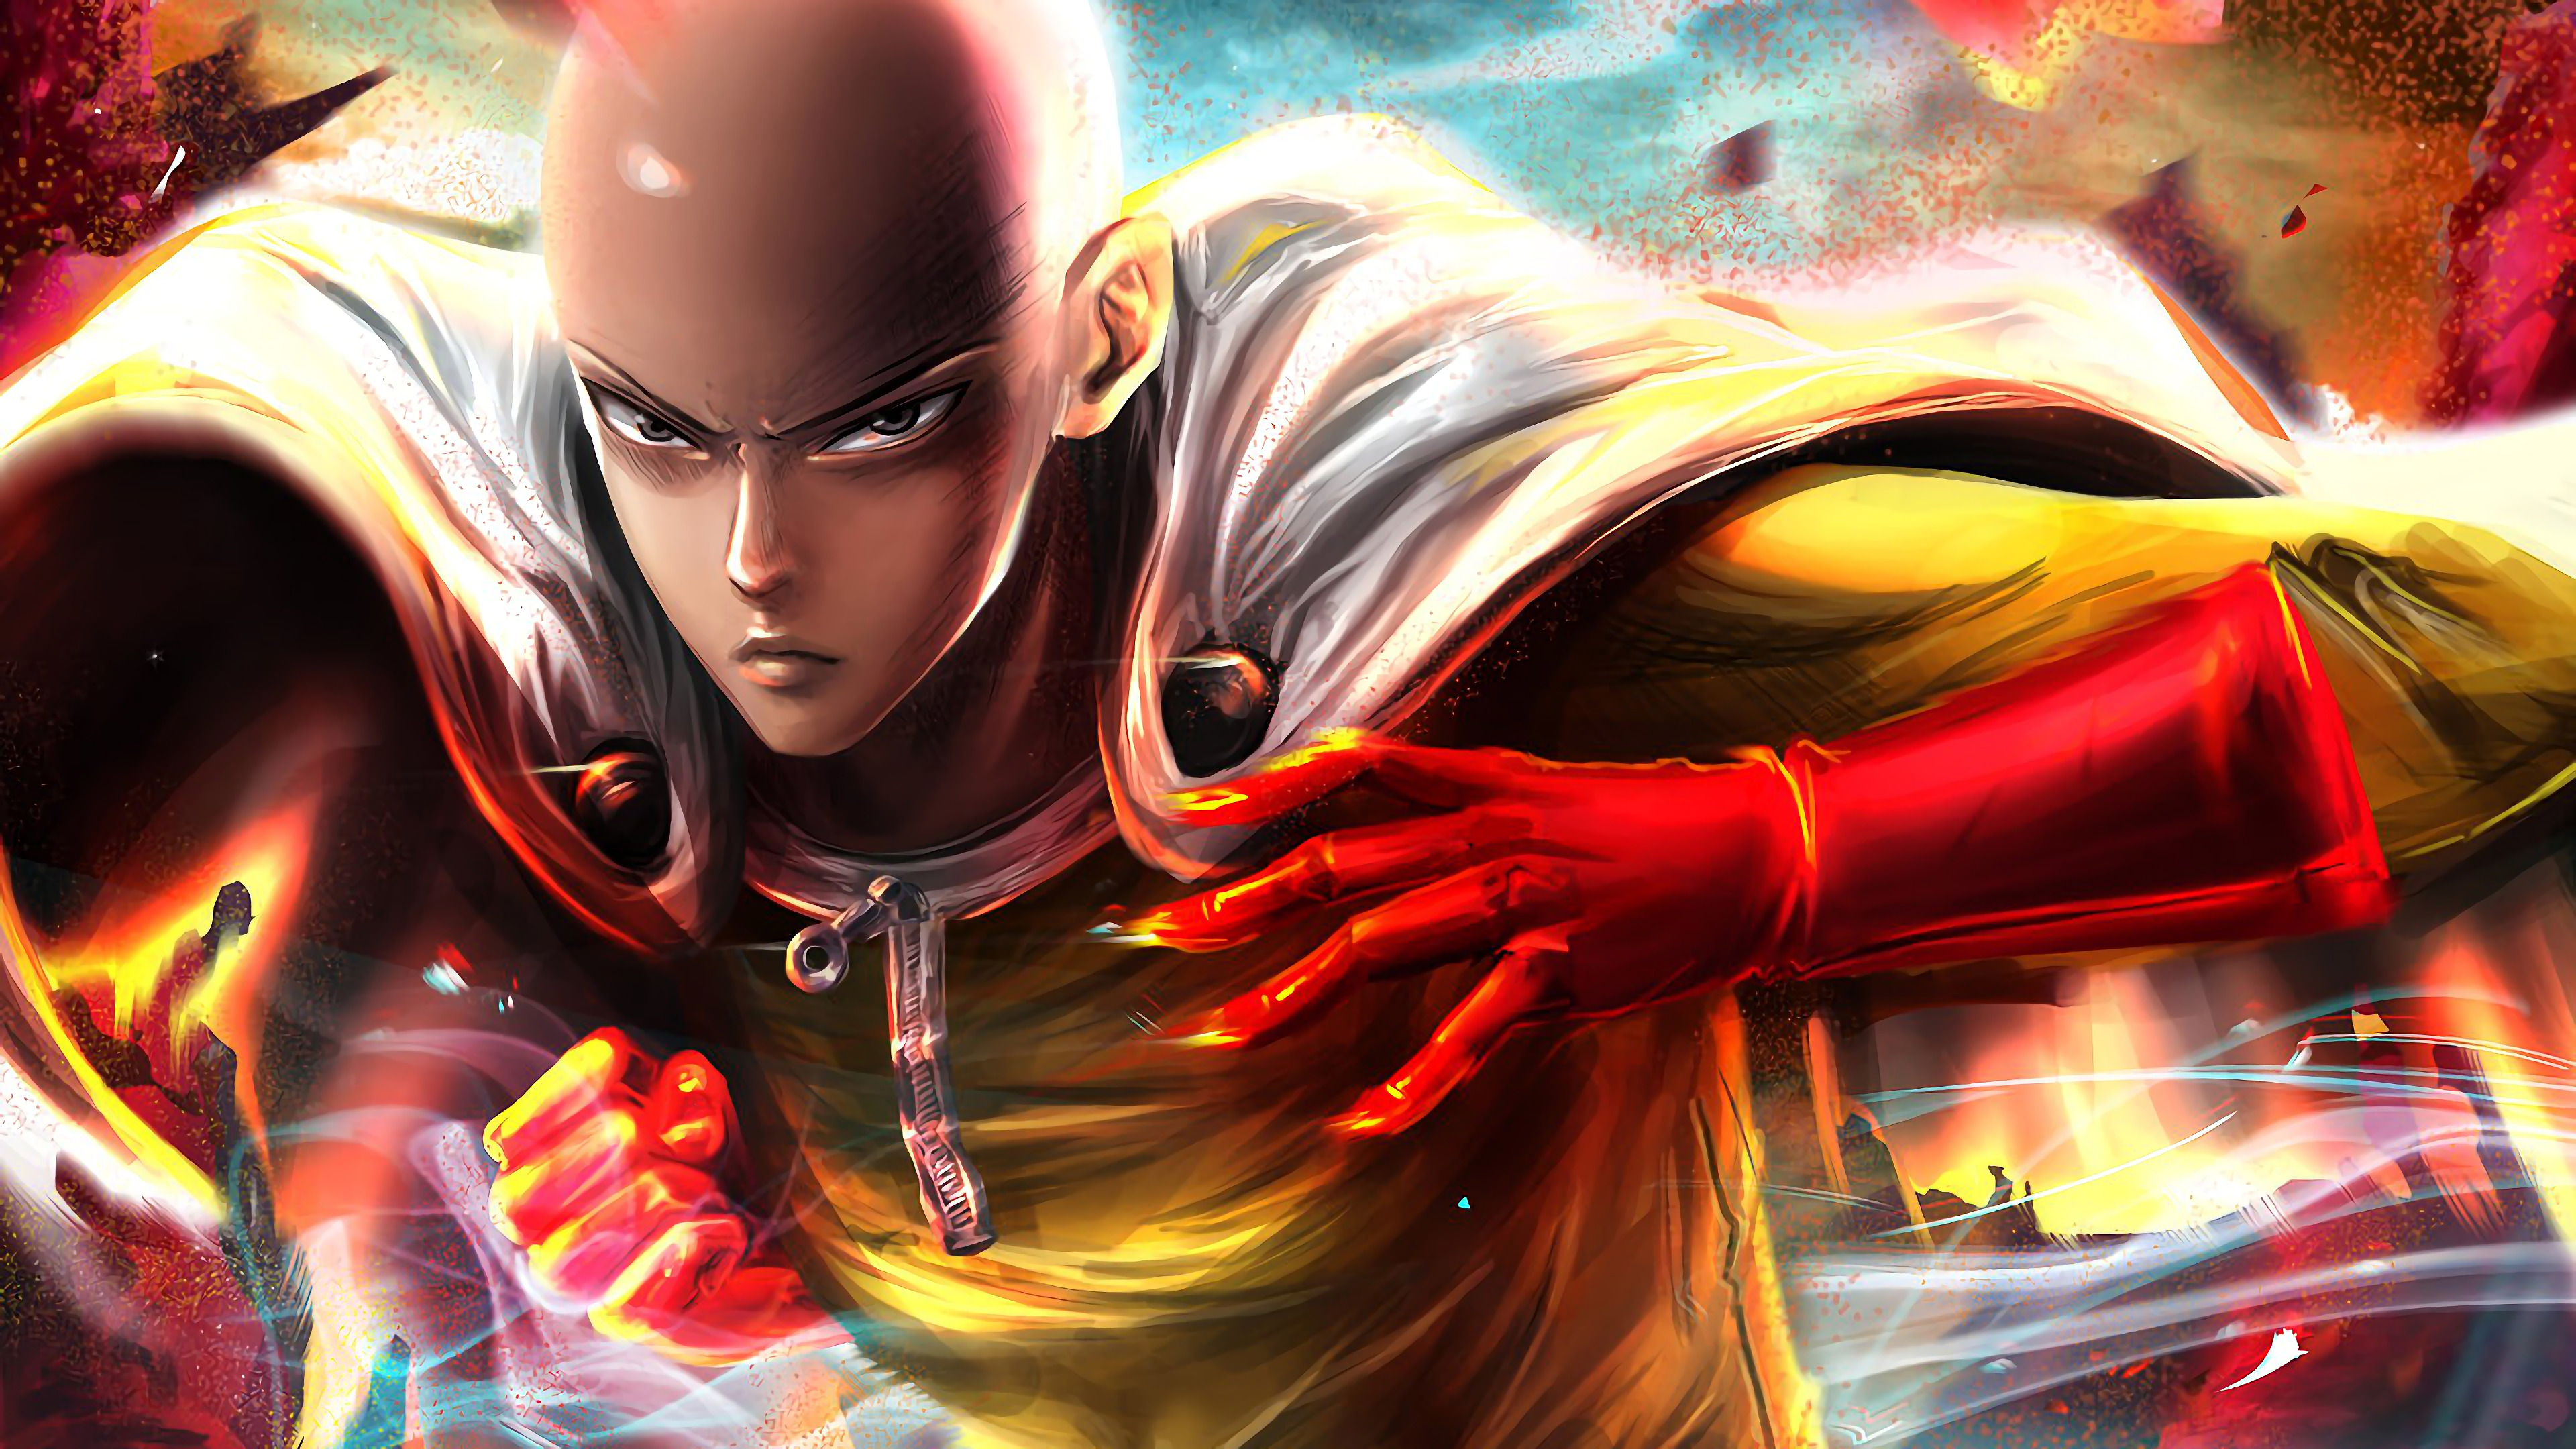 10. "Saitama" from One Punch Man - wide 7